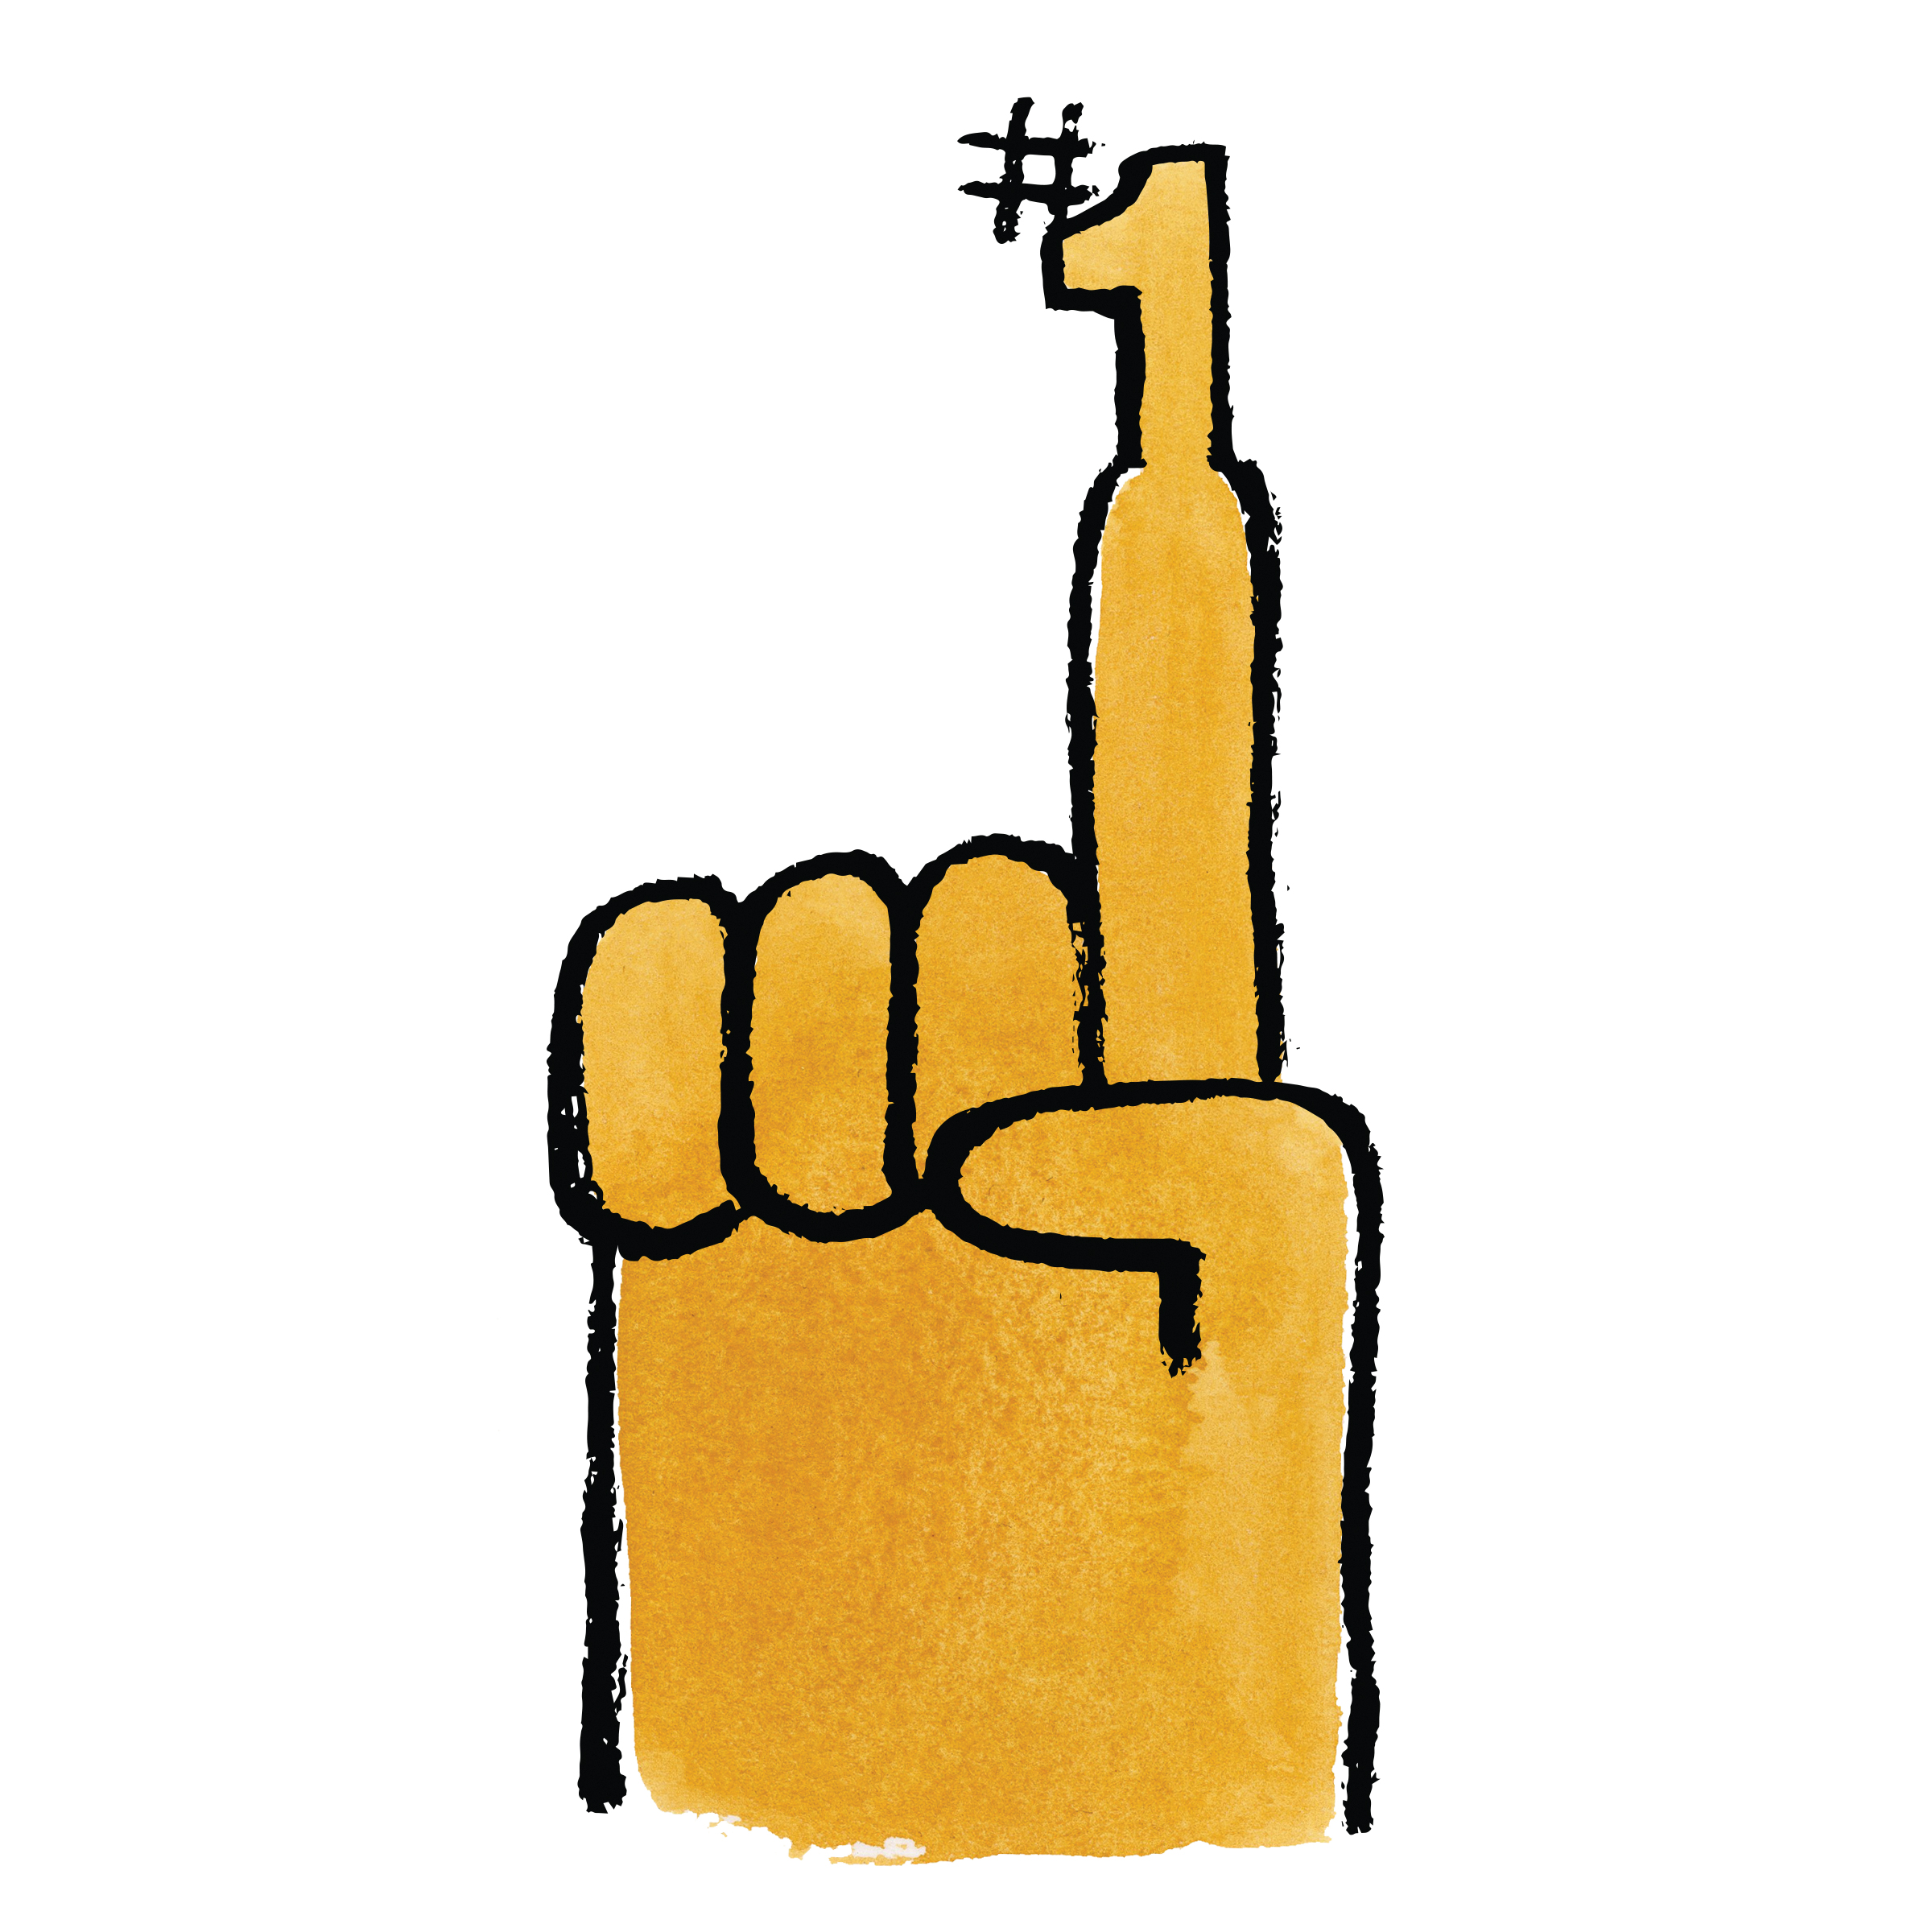 an illustration of a hand holding up one finger with #1 attached